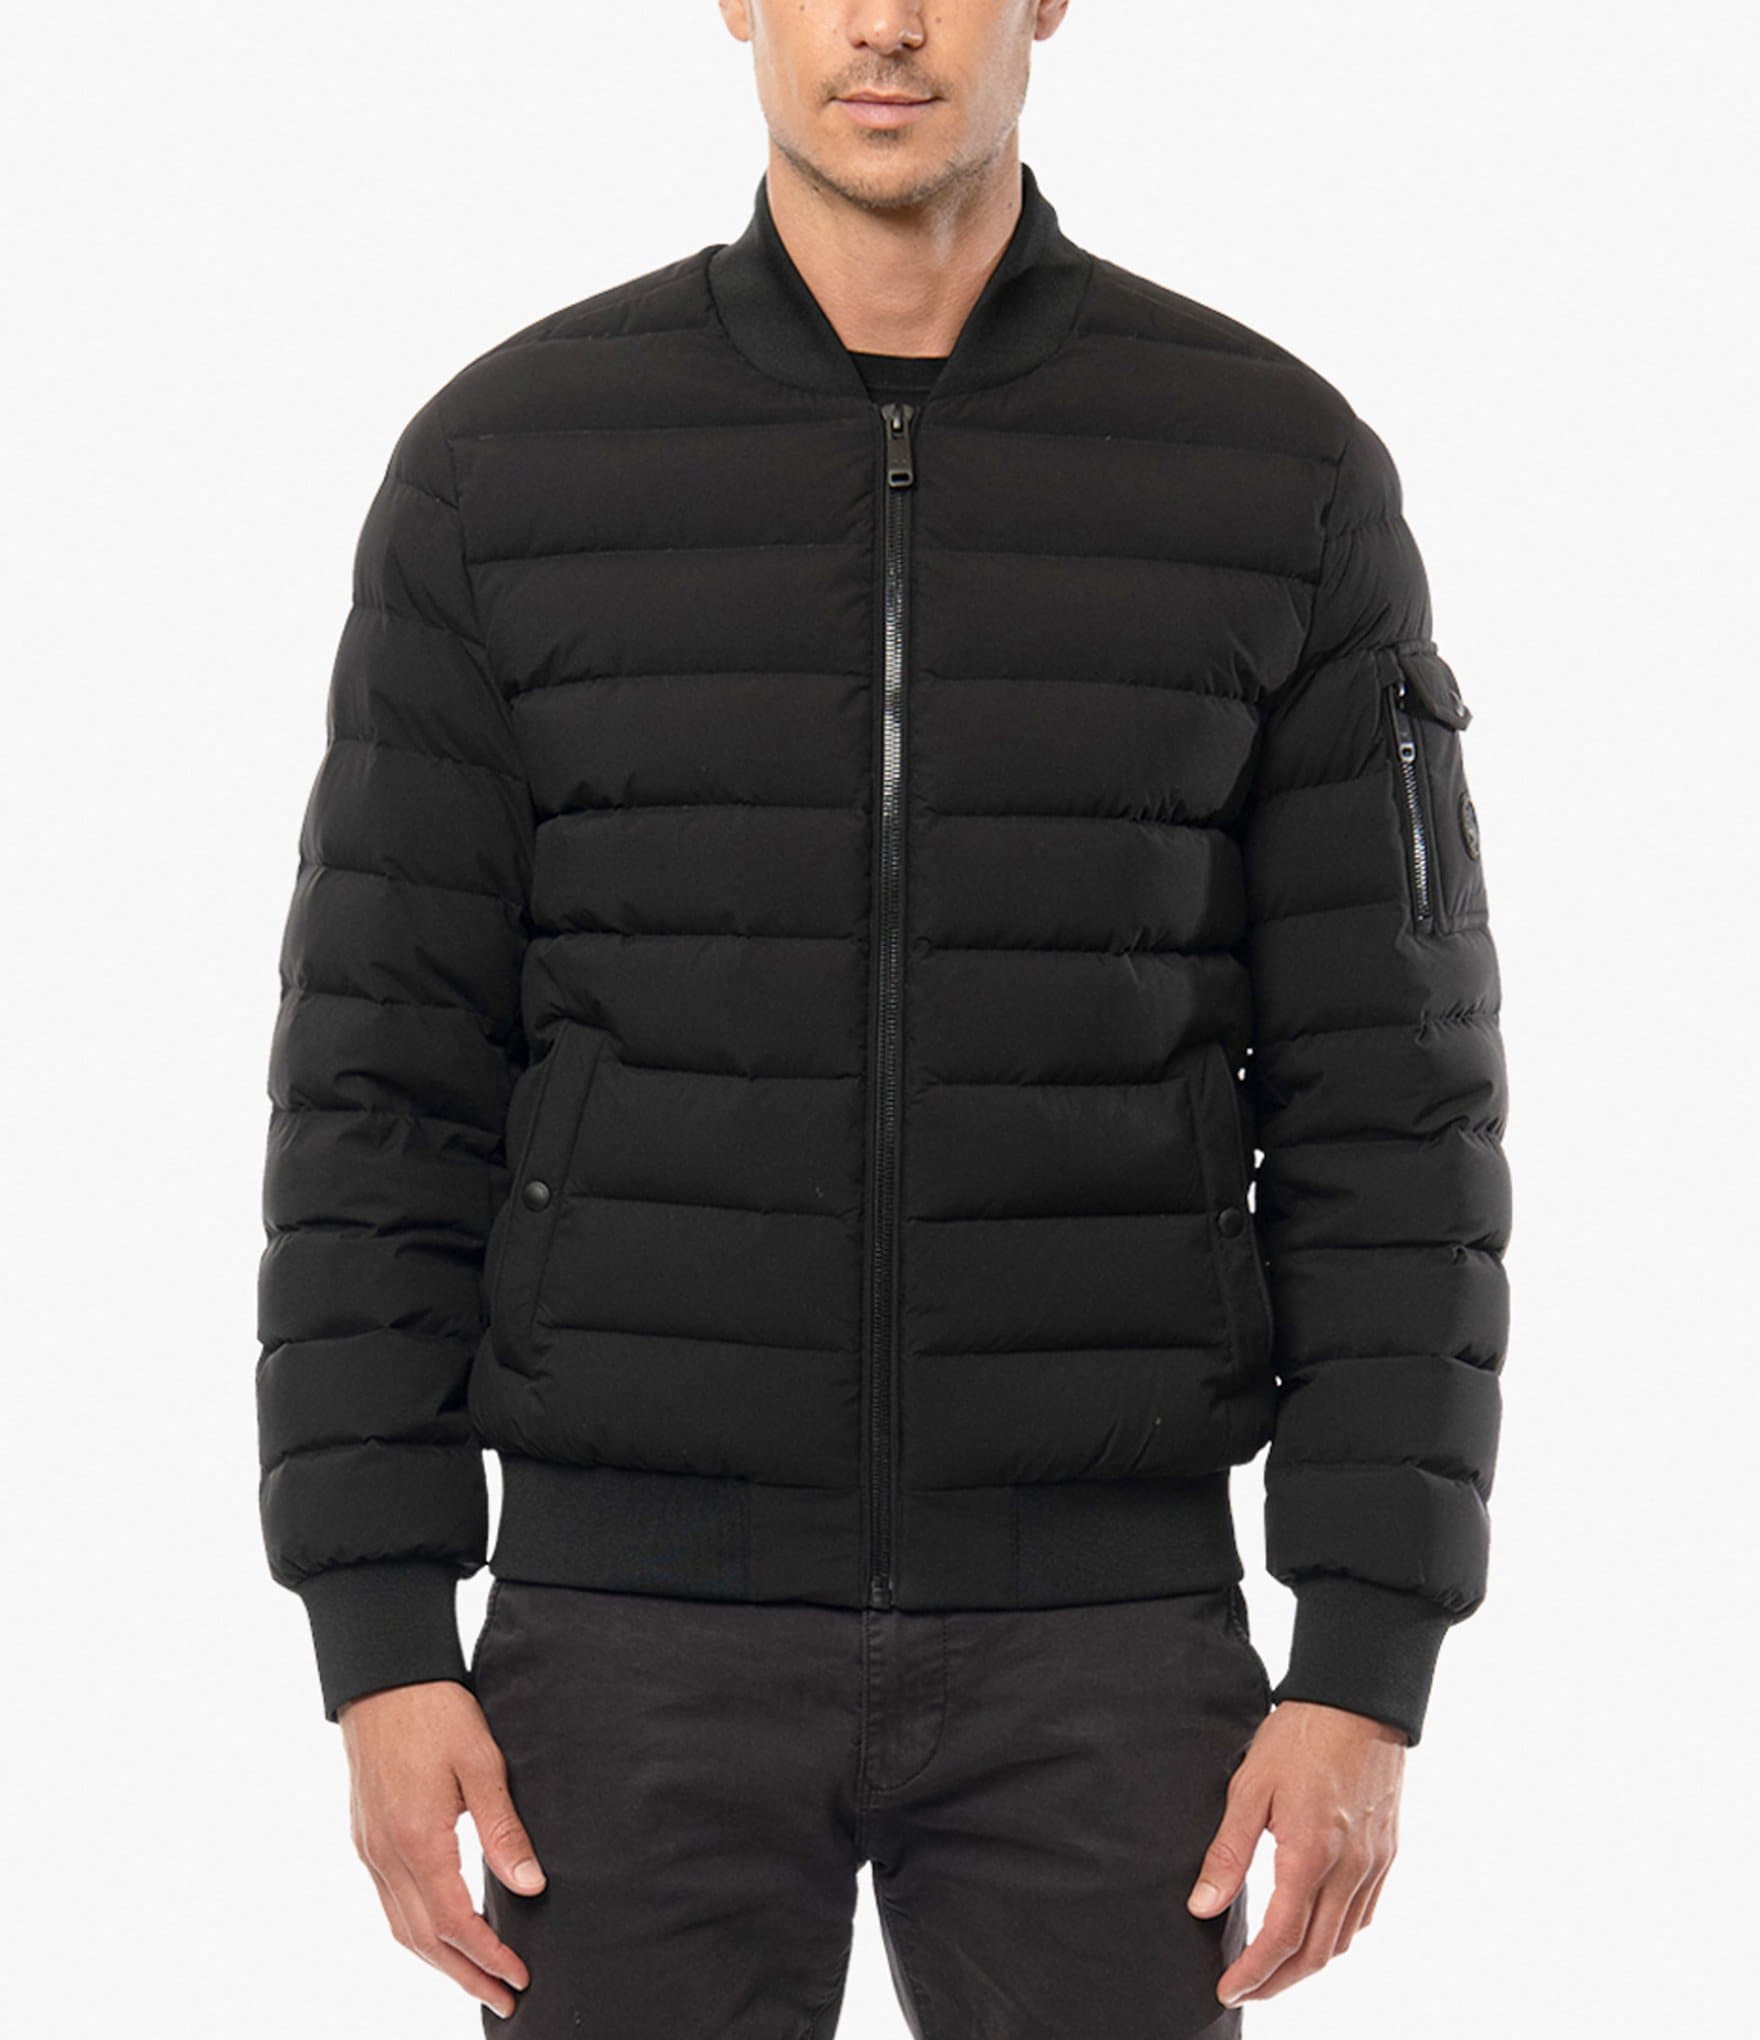 The Recycled Planet Company Pillar Repreve Insulated Full-Zip Jacket ...